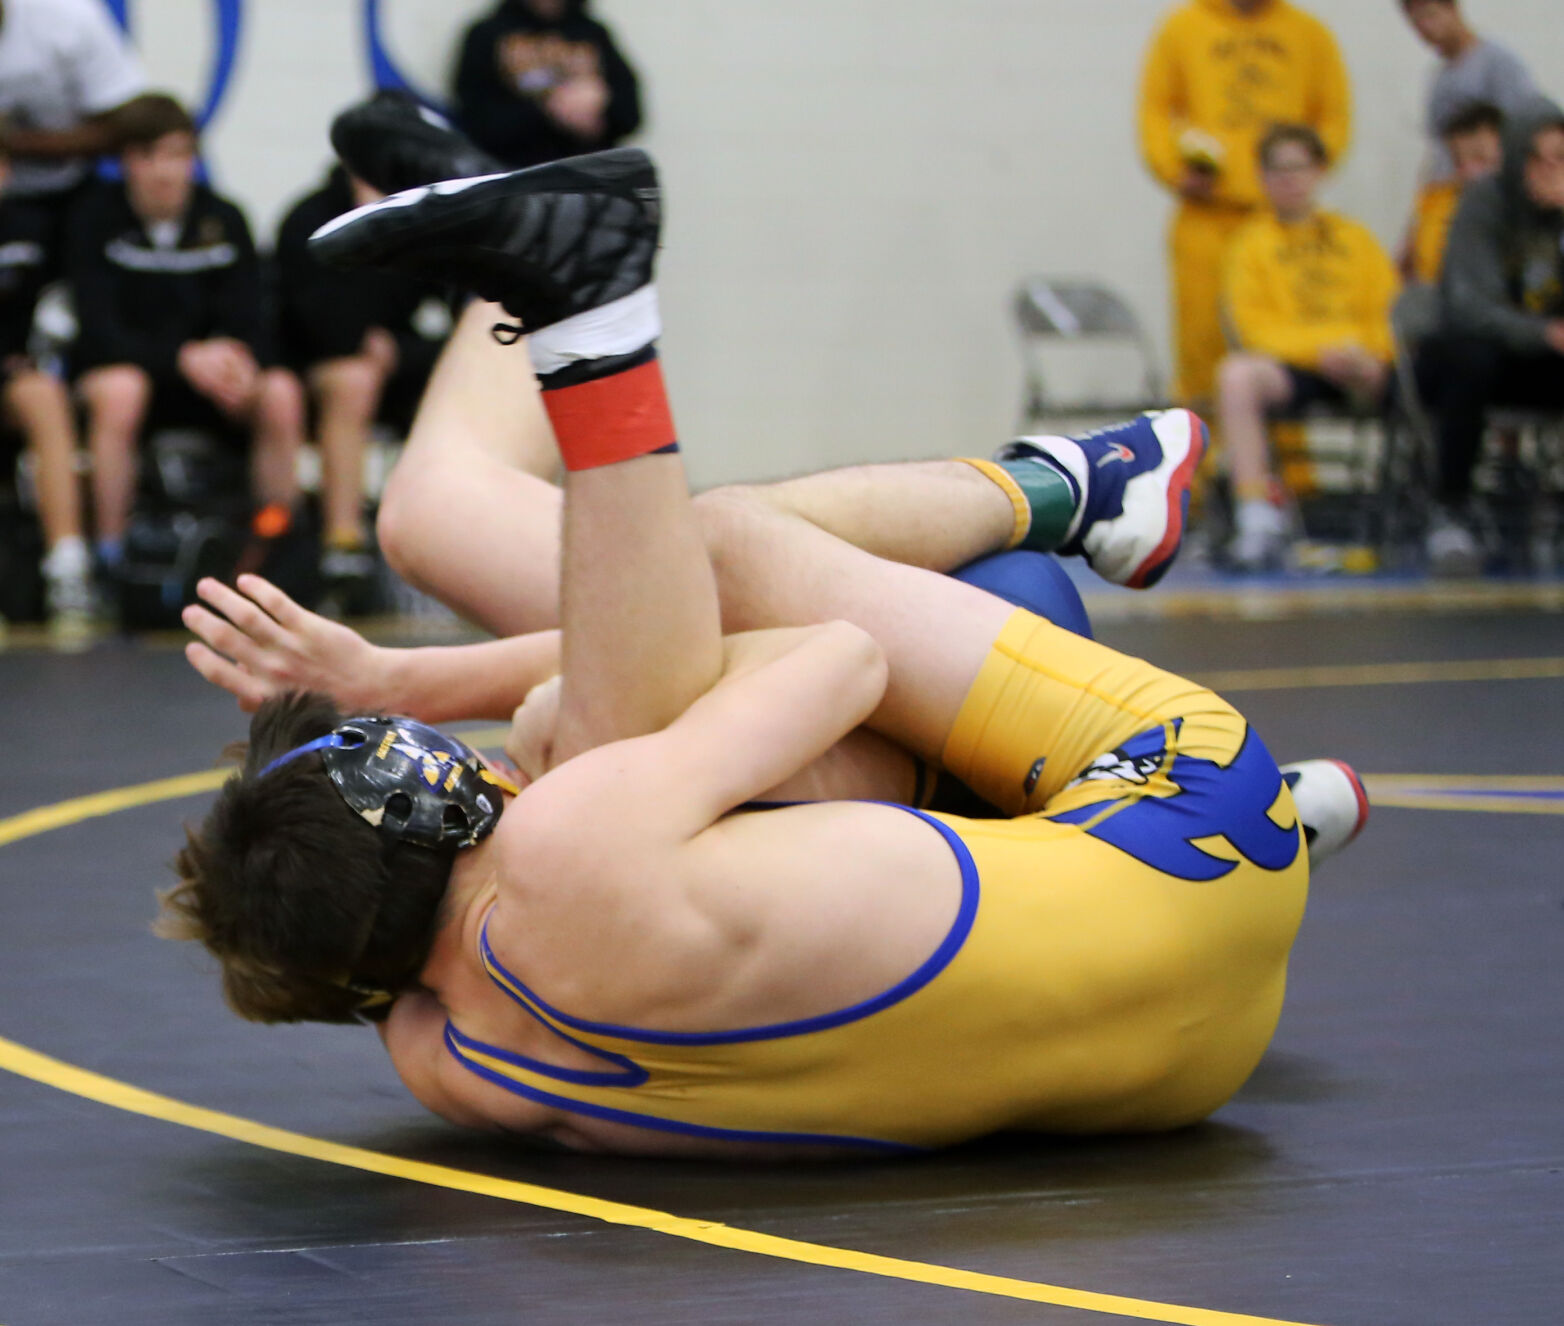 Hastings wrestling takes seventh at Bi-State Classic | Sports